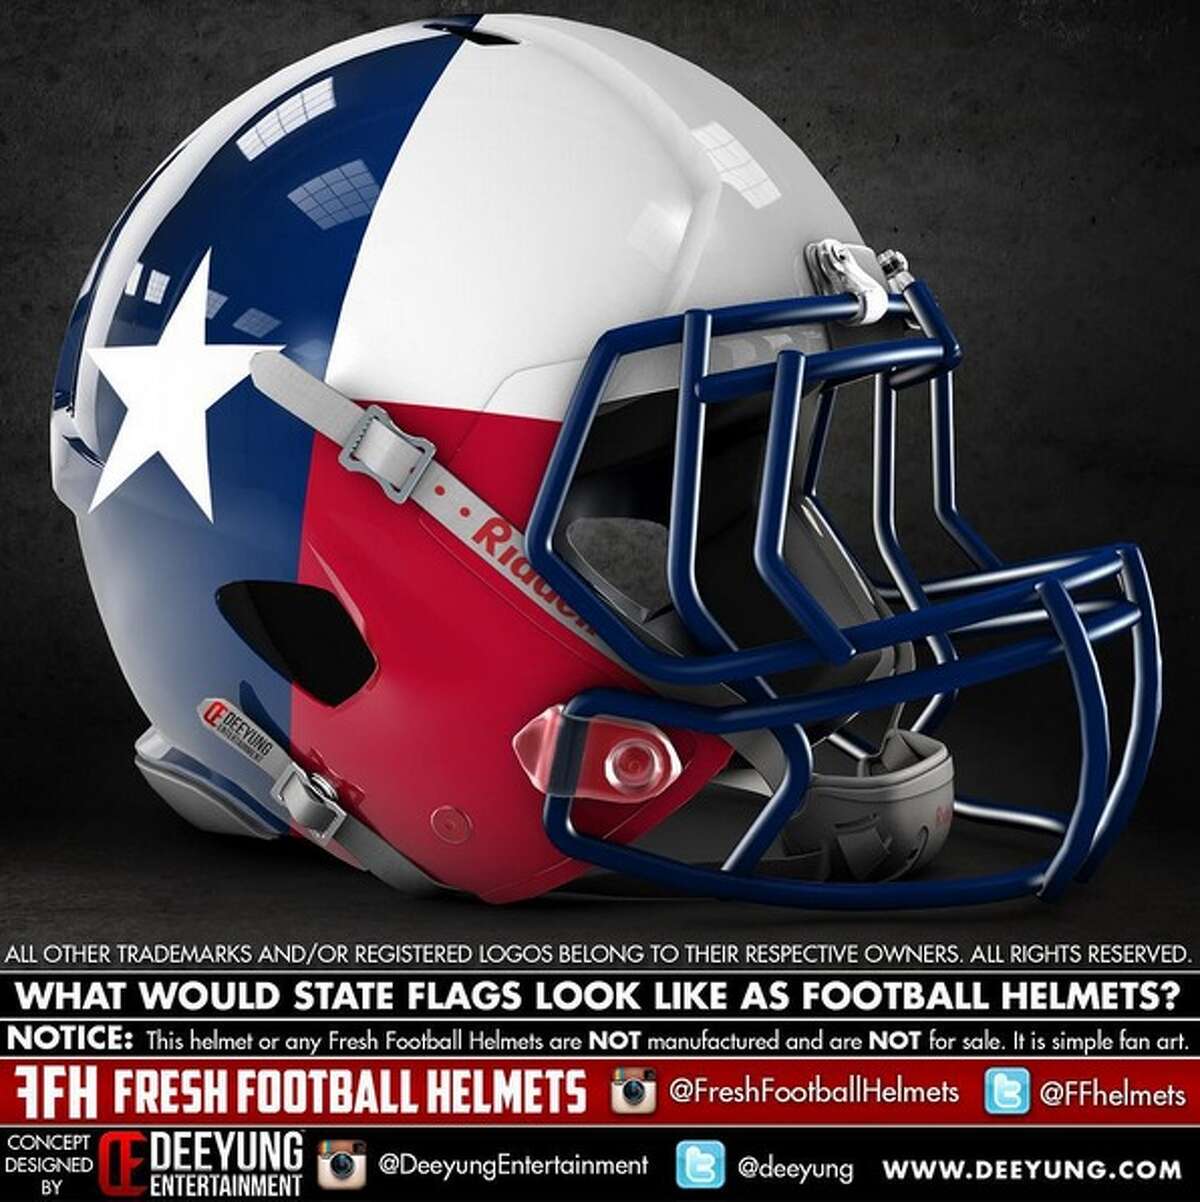 Football helmets redesigned to look like state flags